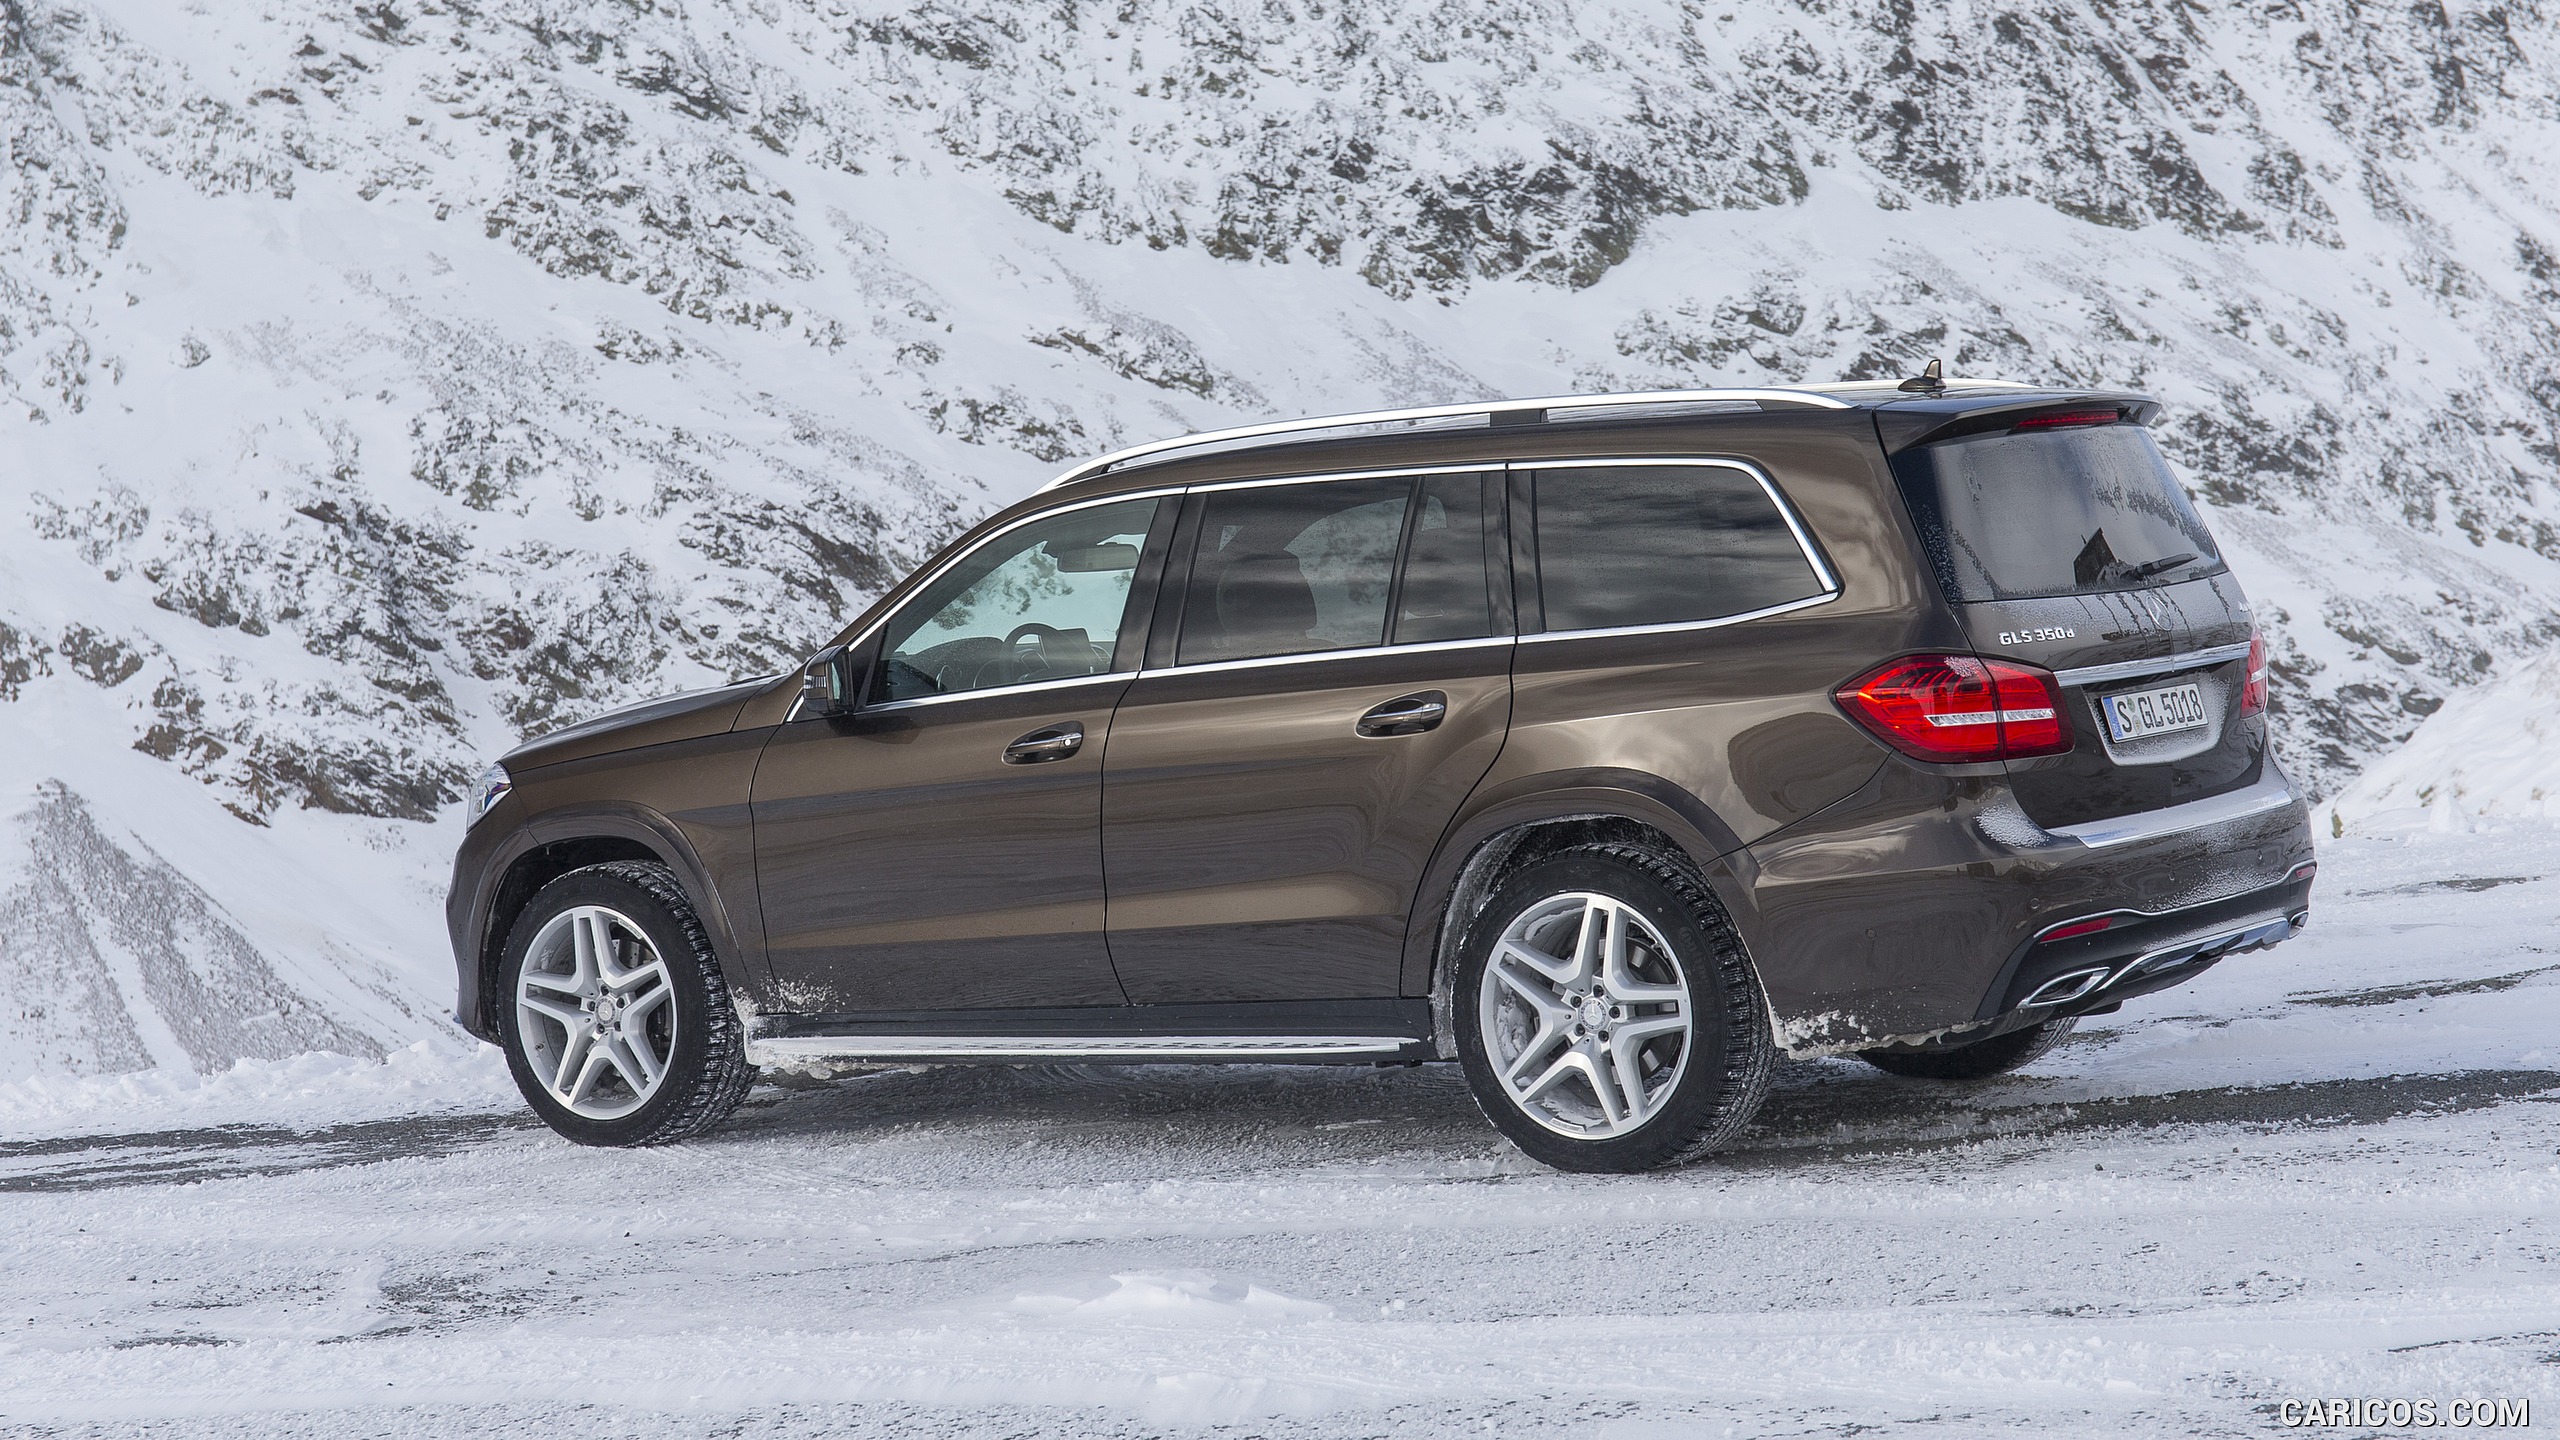 2017 Mercedes-Benz GLS 350d 4MATIC AMG Line in Snow - Side, #188 of 255